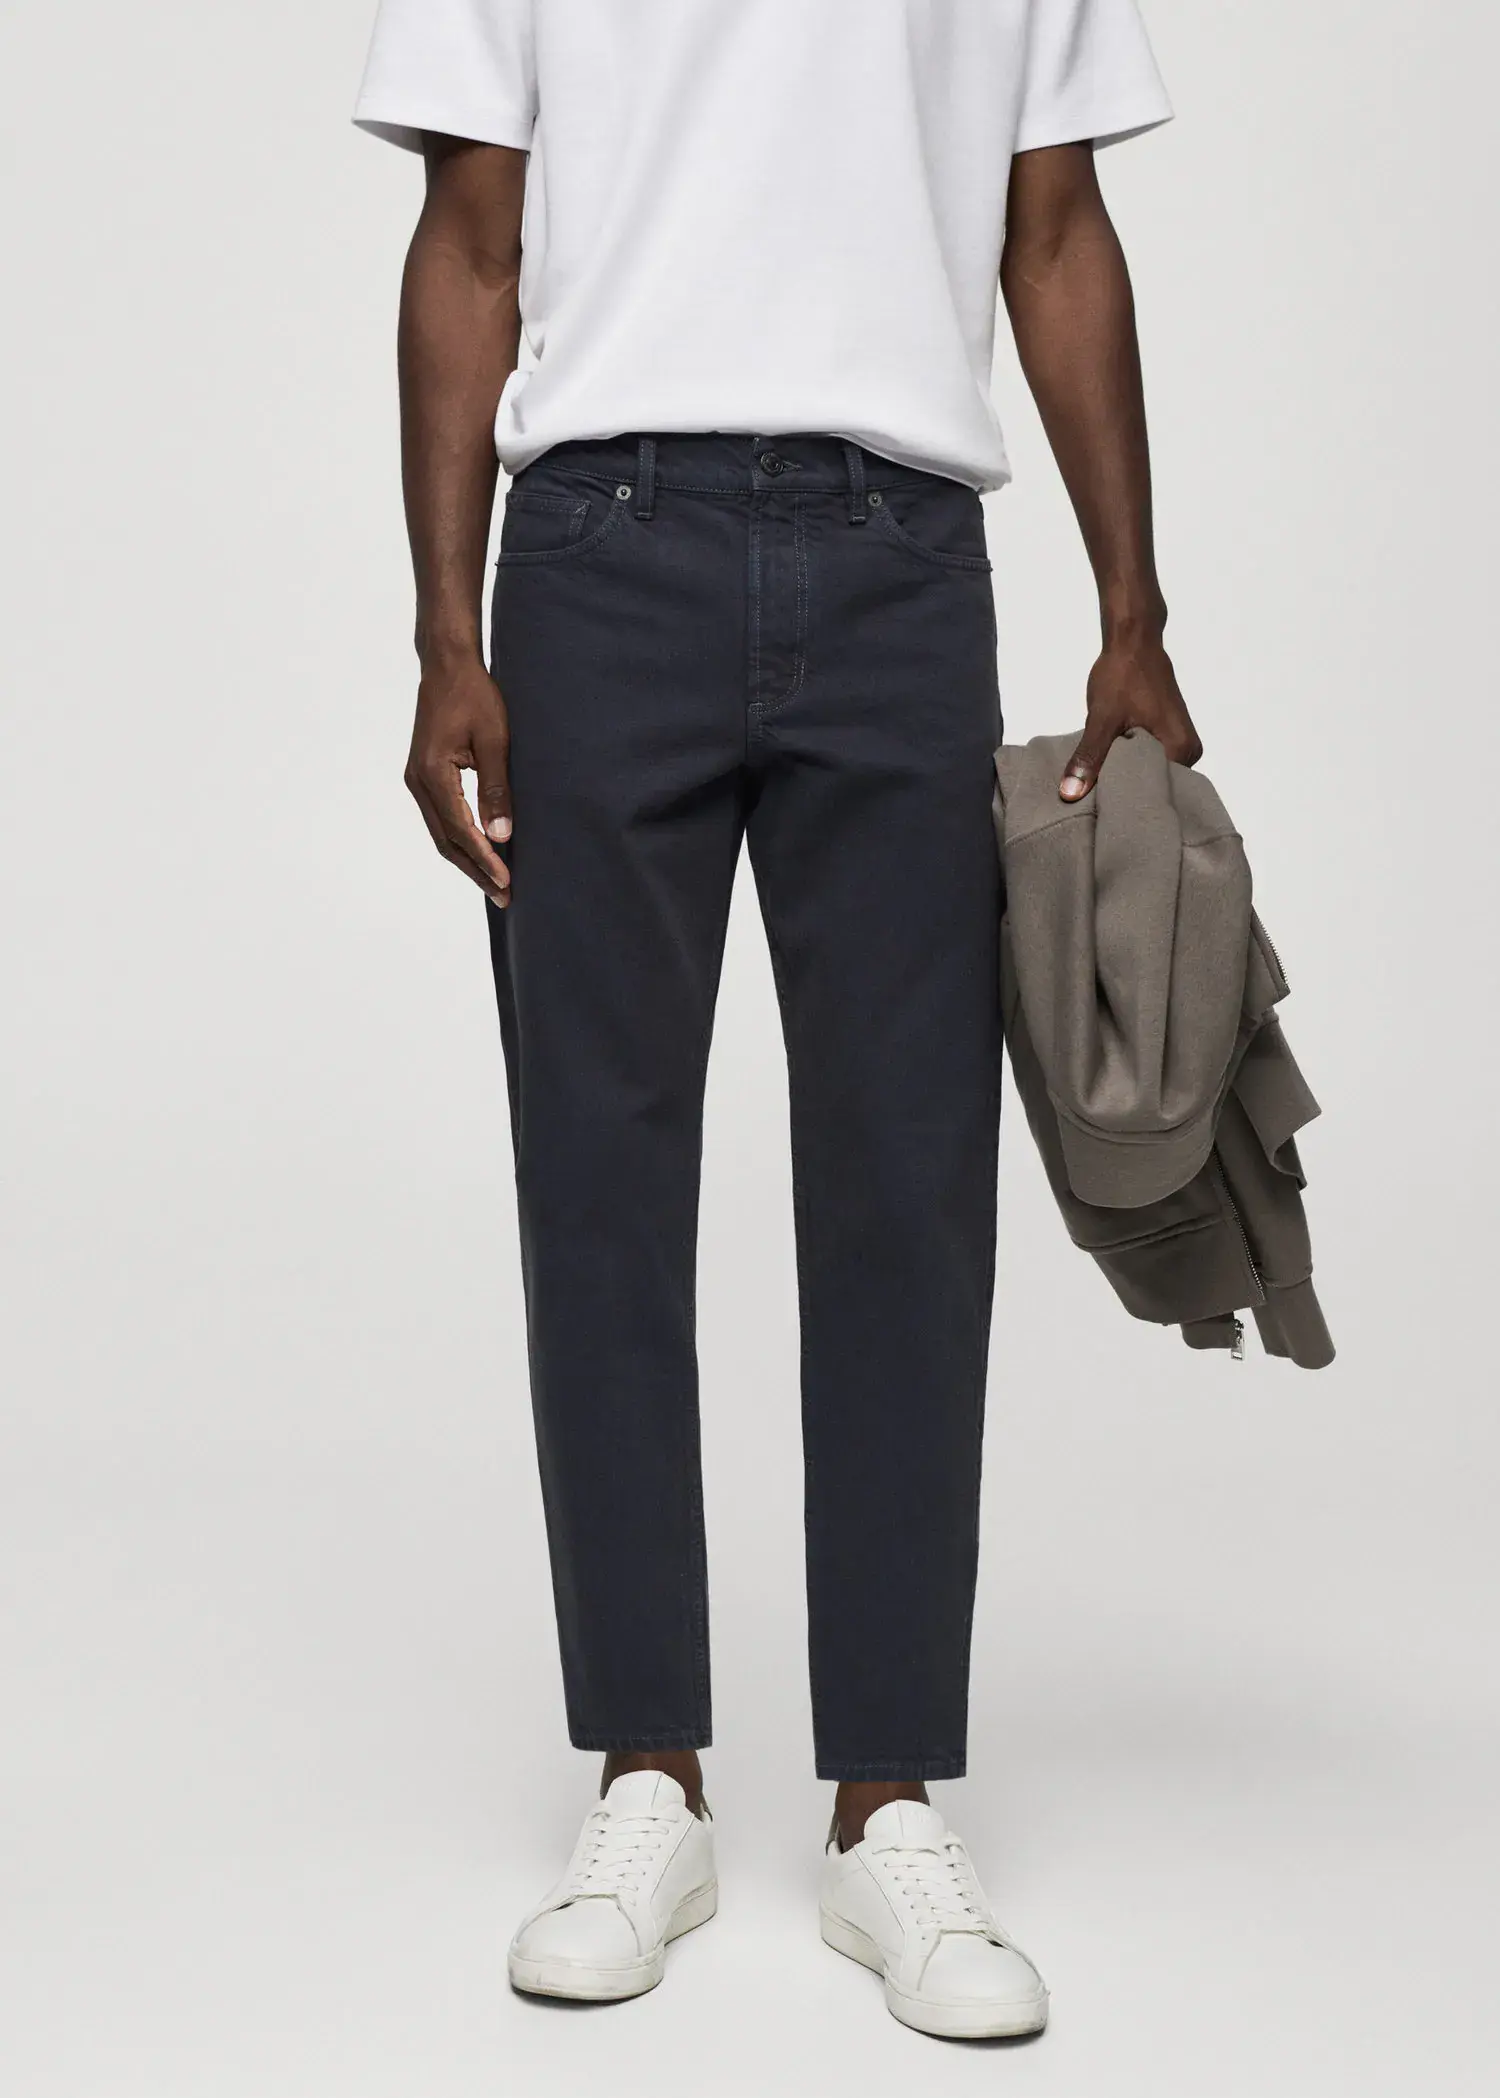 Mango Ben tapered fit jeans. 1